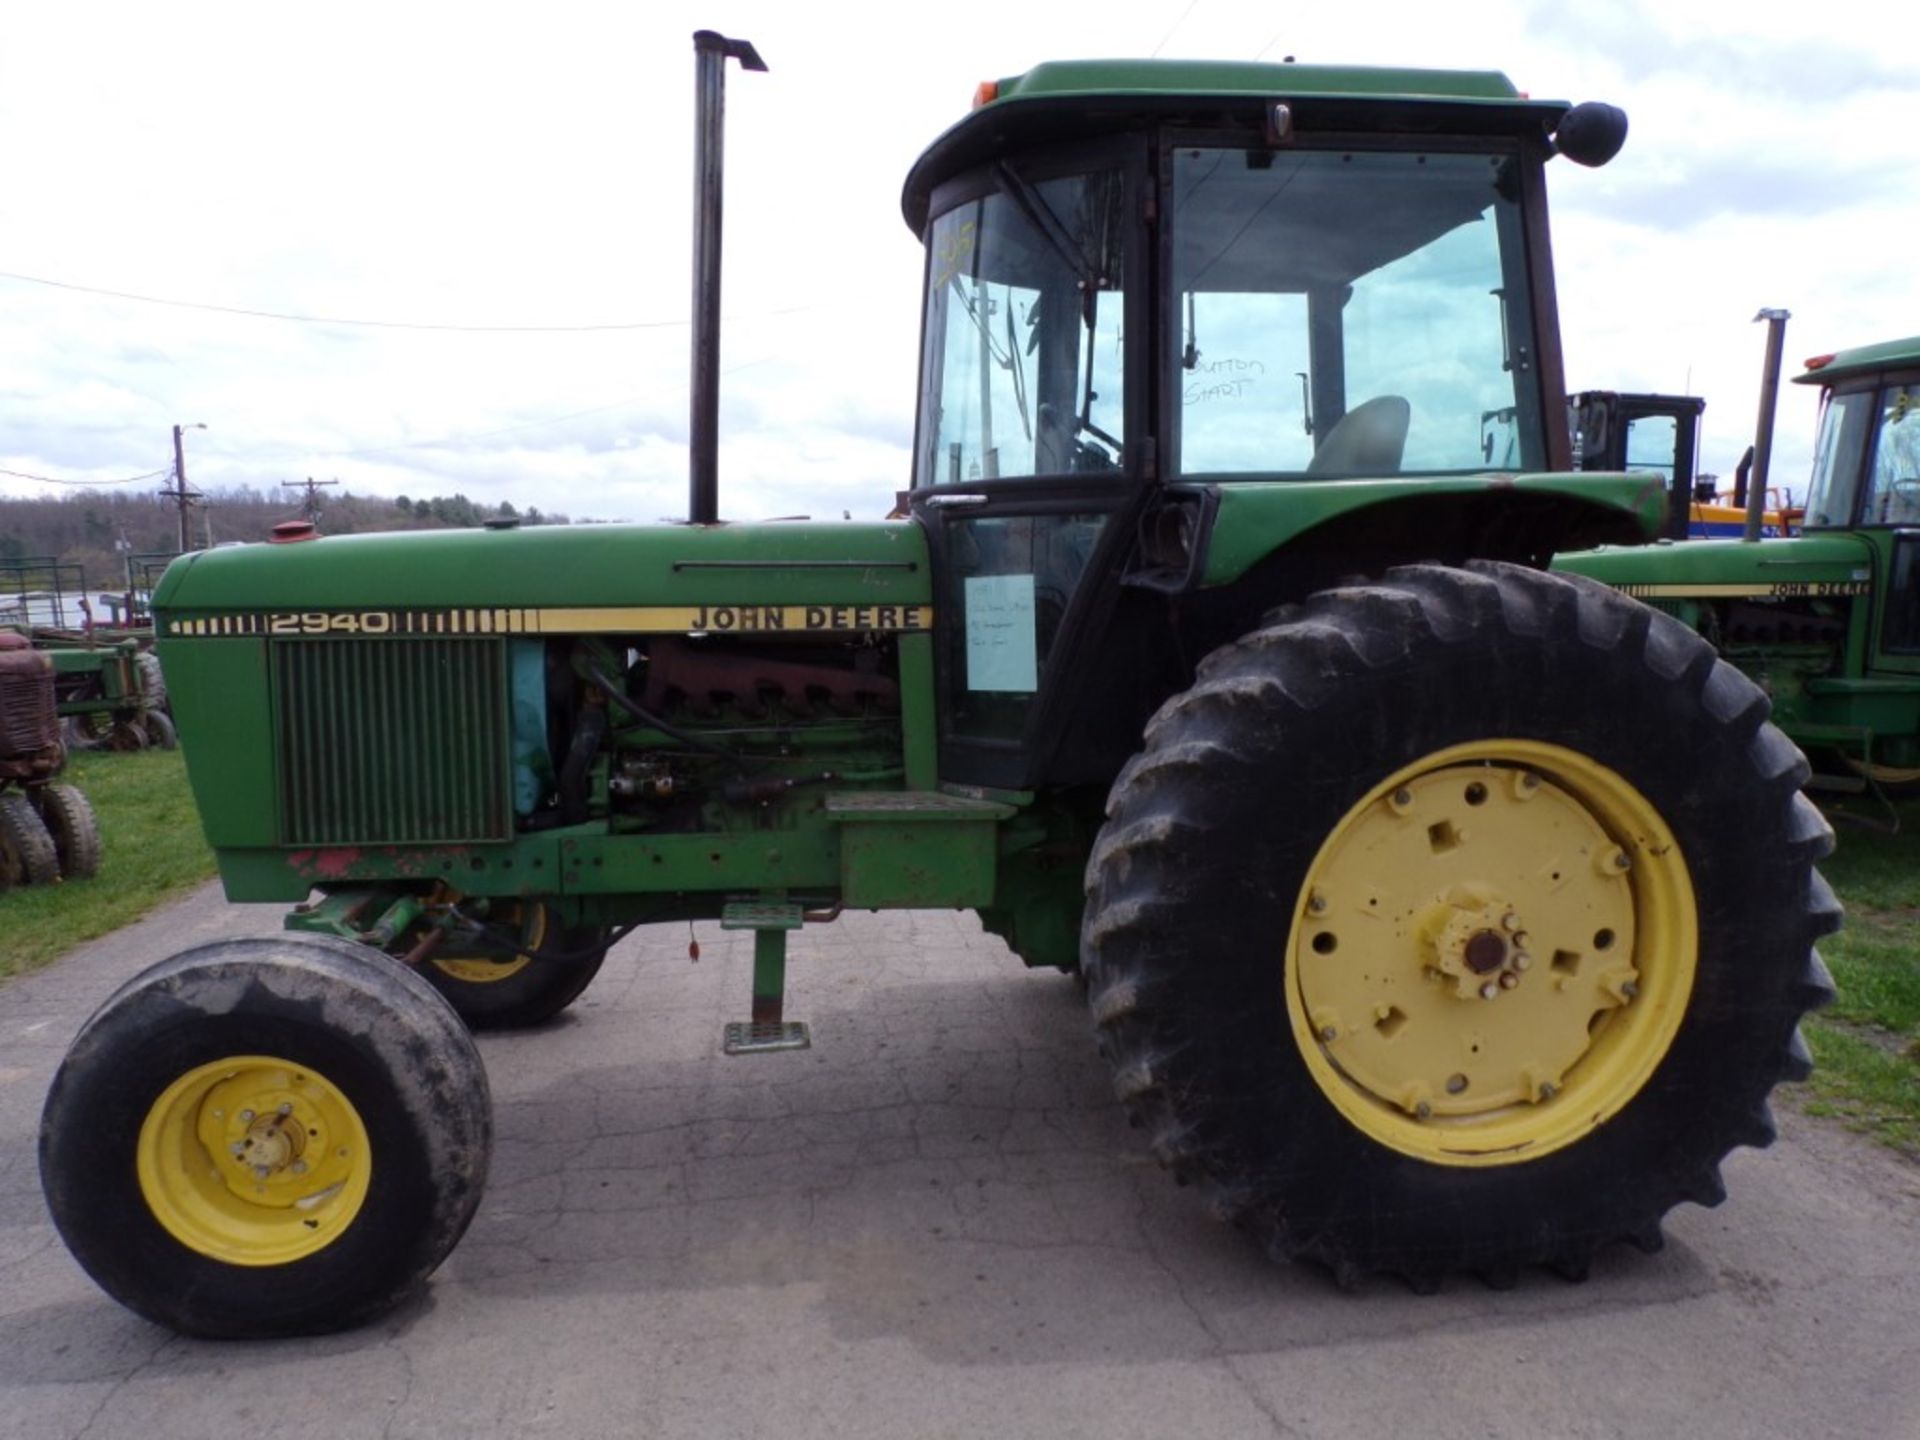 John Deere 2940 Tractor with Sound Guard Cab, Excellent Firestone 8.4-34 Rear Tires, (2) Rear - Image 3 of 5